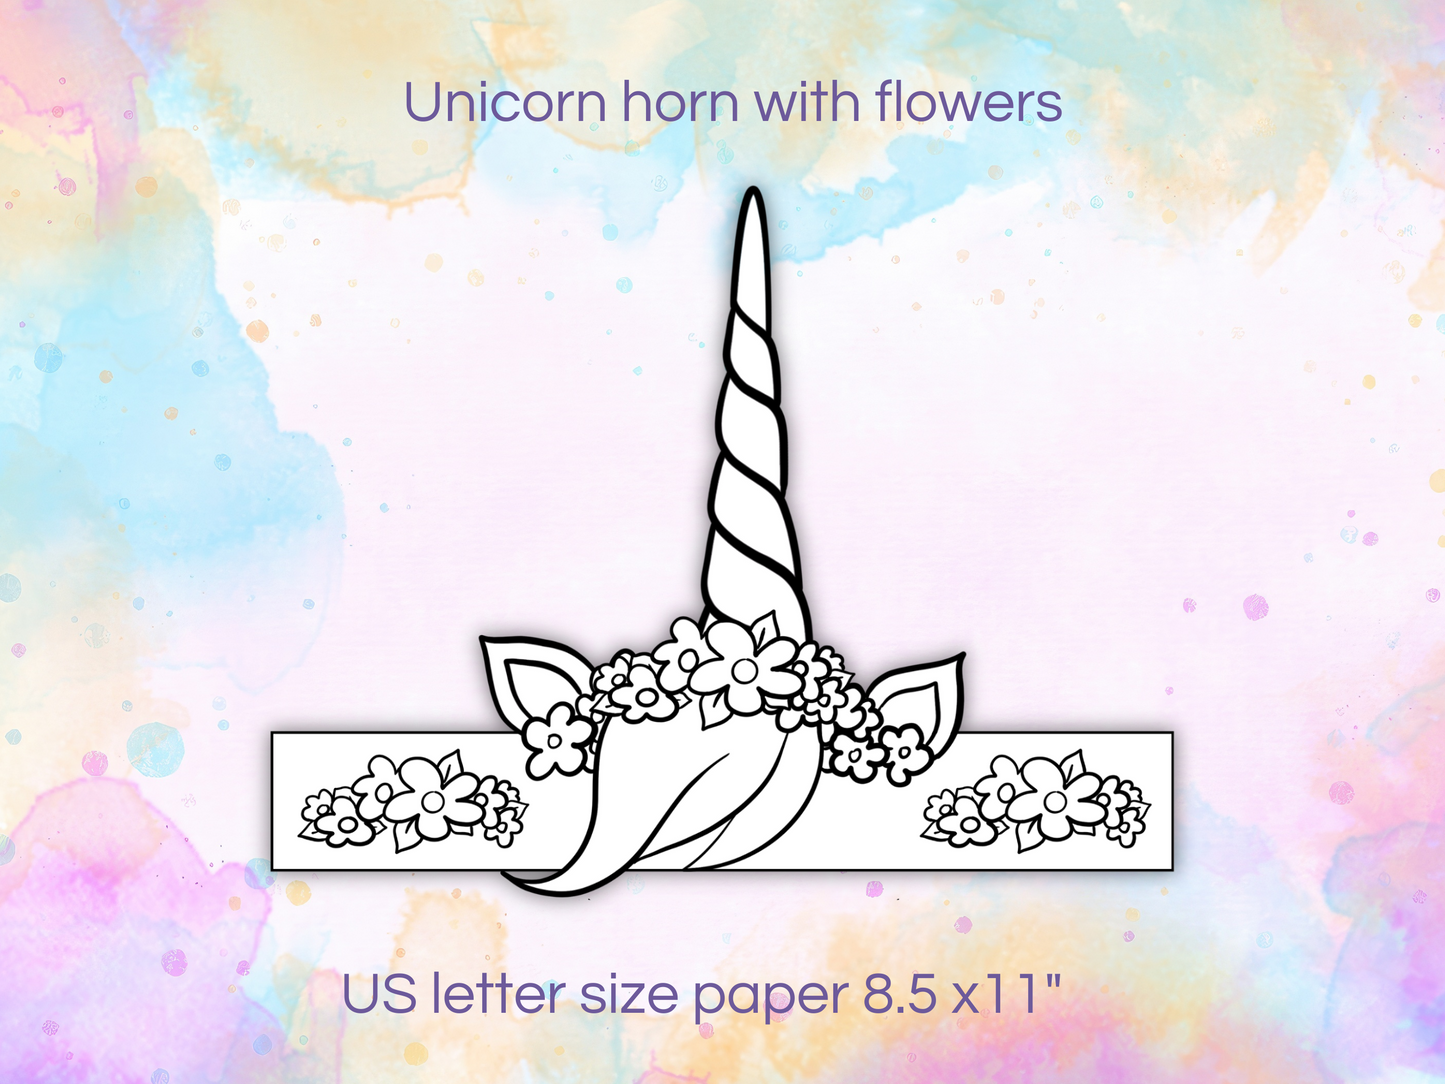 Unicorn paper crown with horn and flowers